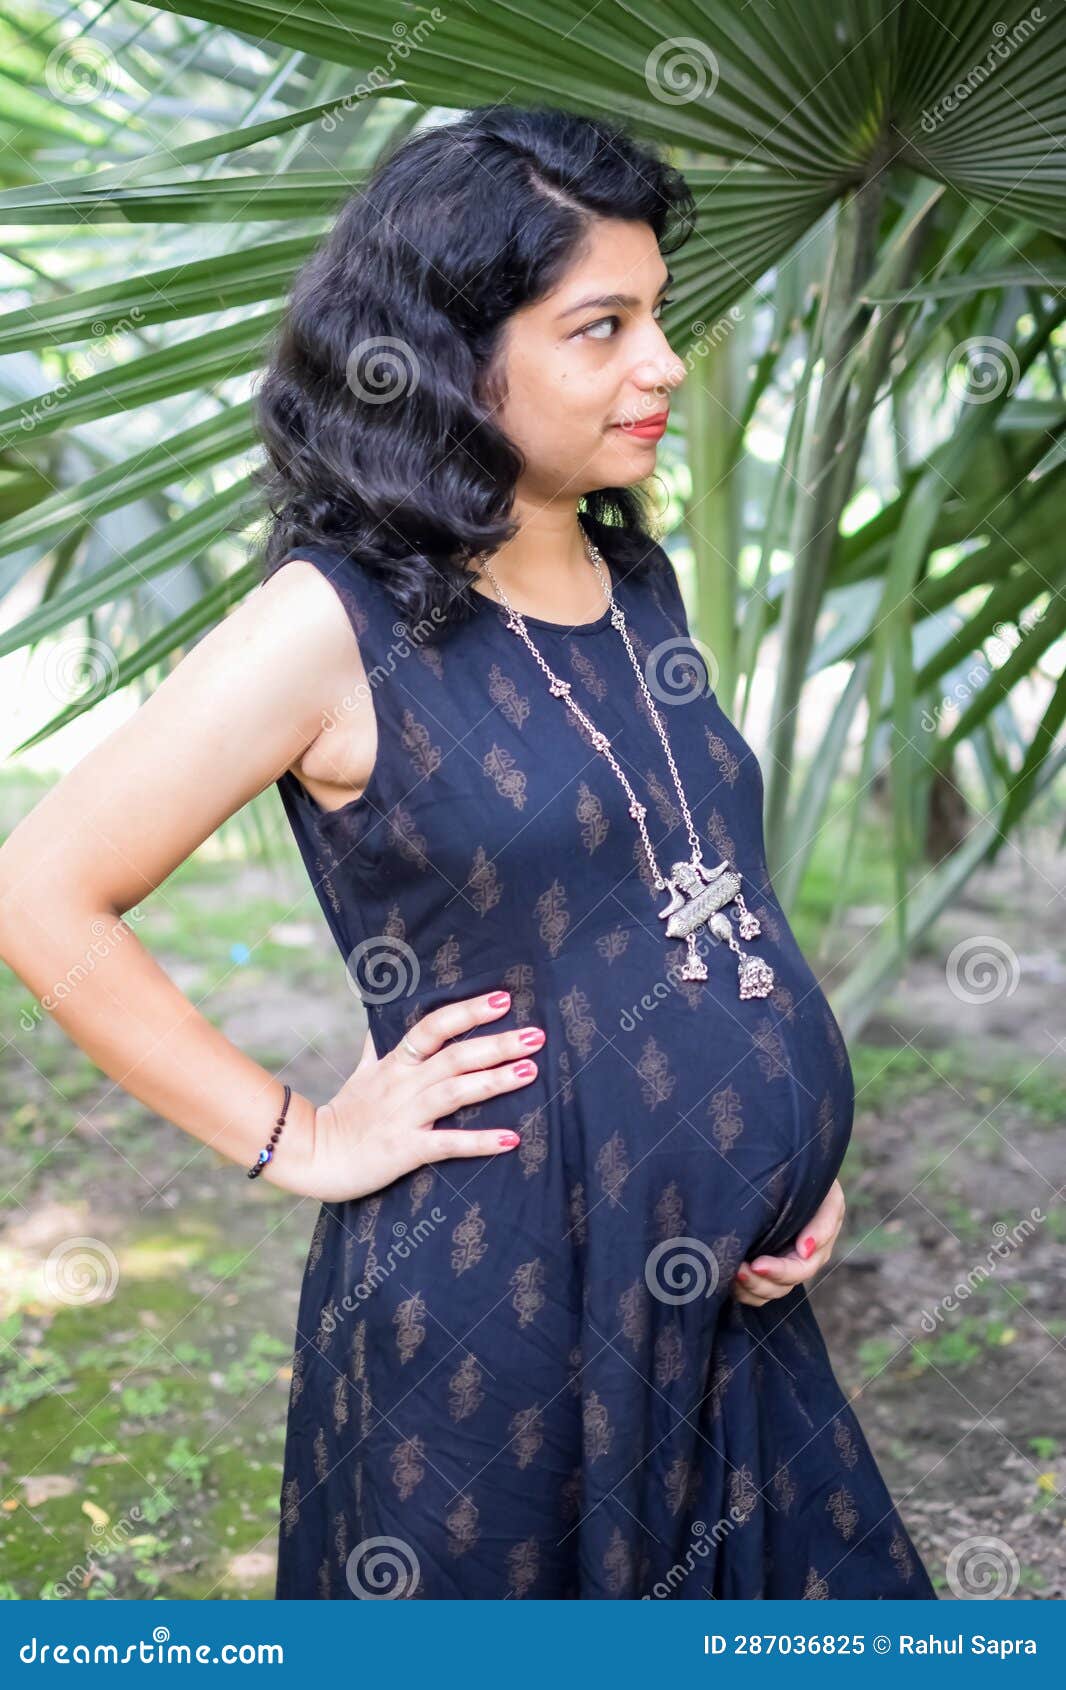 https://thumbs.dreamstime.com/z/pregnant-indian-lady-poses-outdoor-pregnancy-shoot-hands-belly-woman-puts-her-hand-stomach-maternity-dress-287036825.jpg